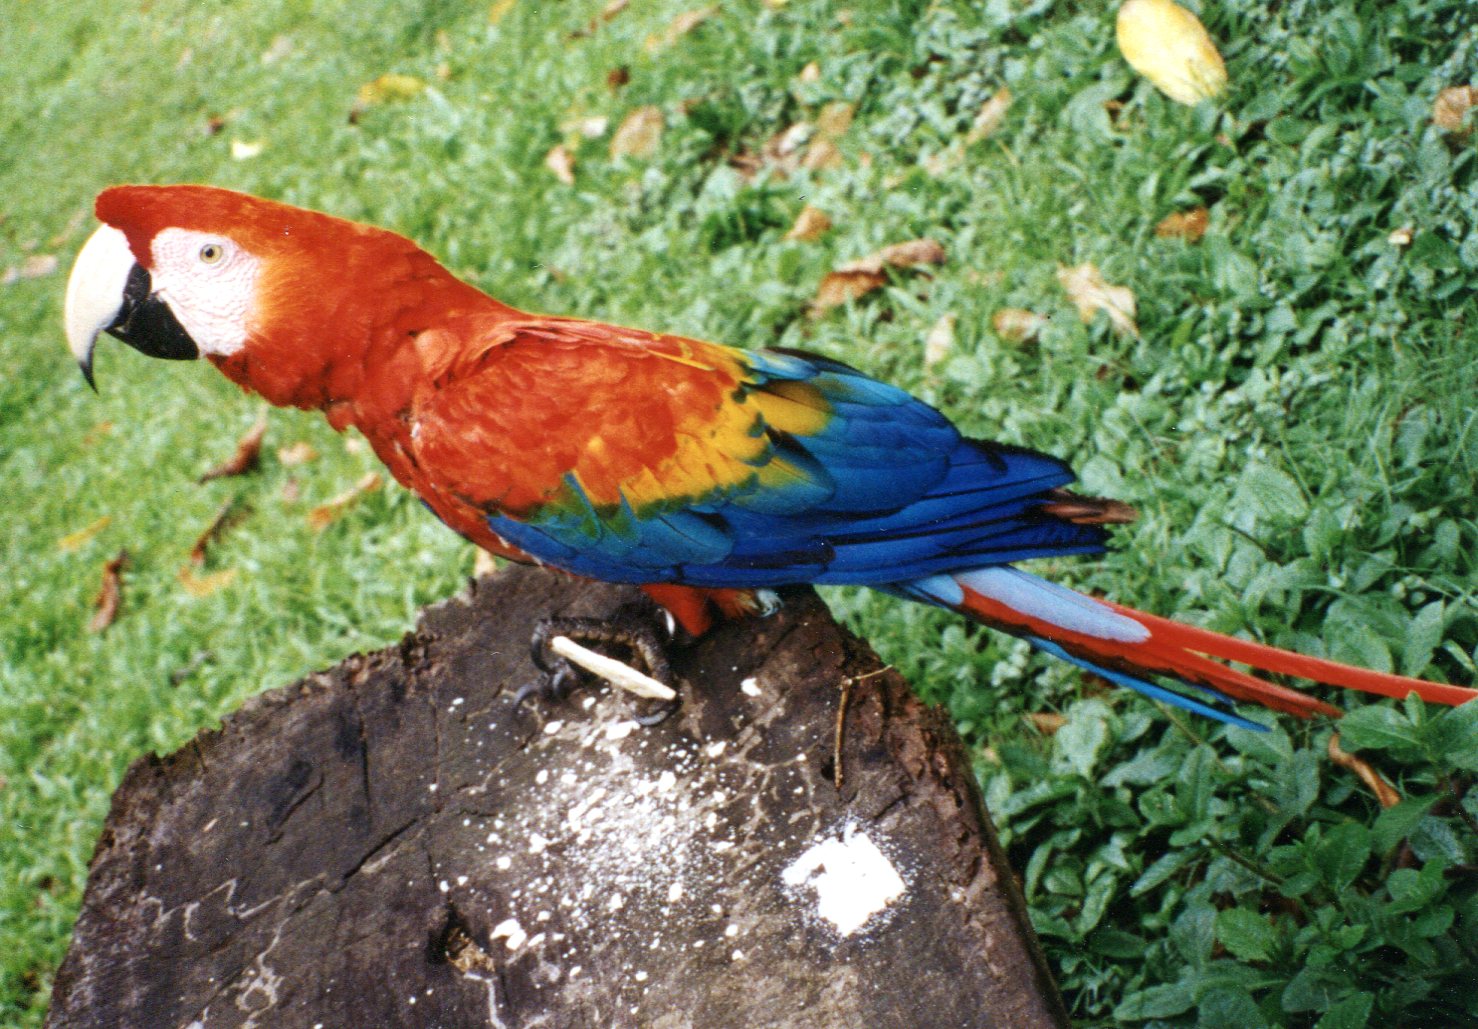 Macaw at the Tambopata Research Center (photo credit: Kim Bartlett - Animal People, Inc.)